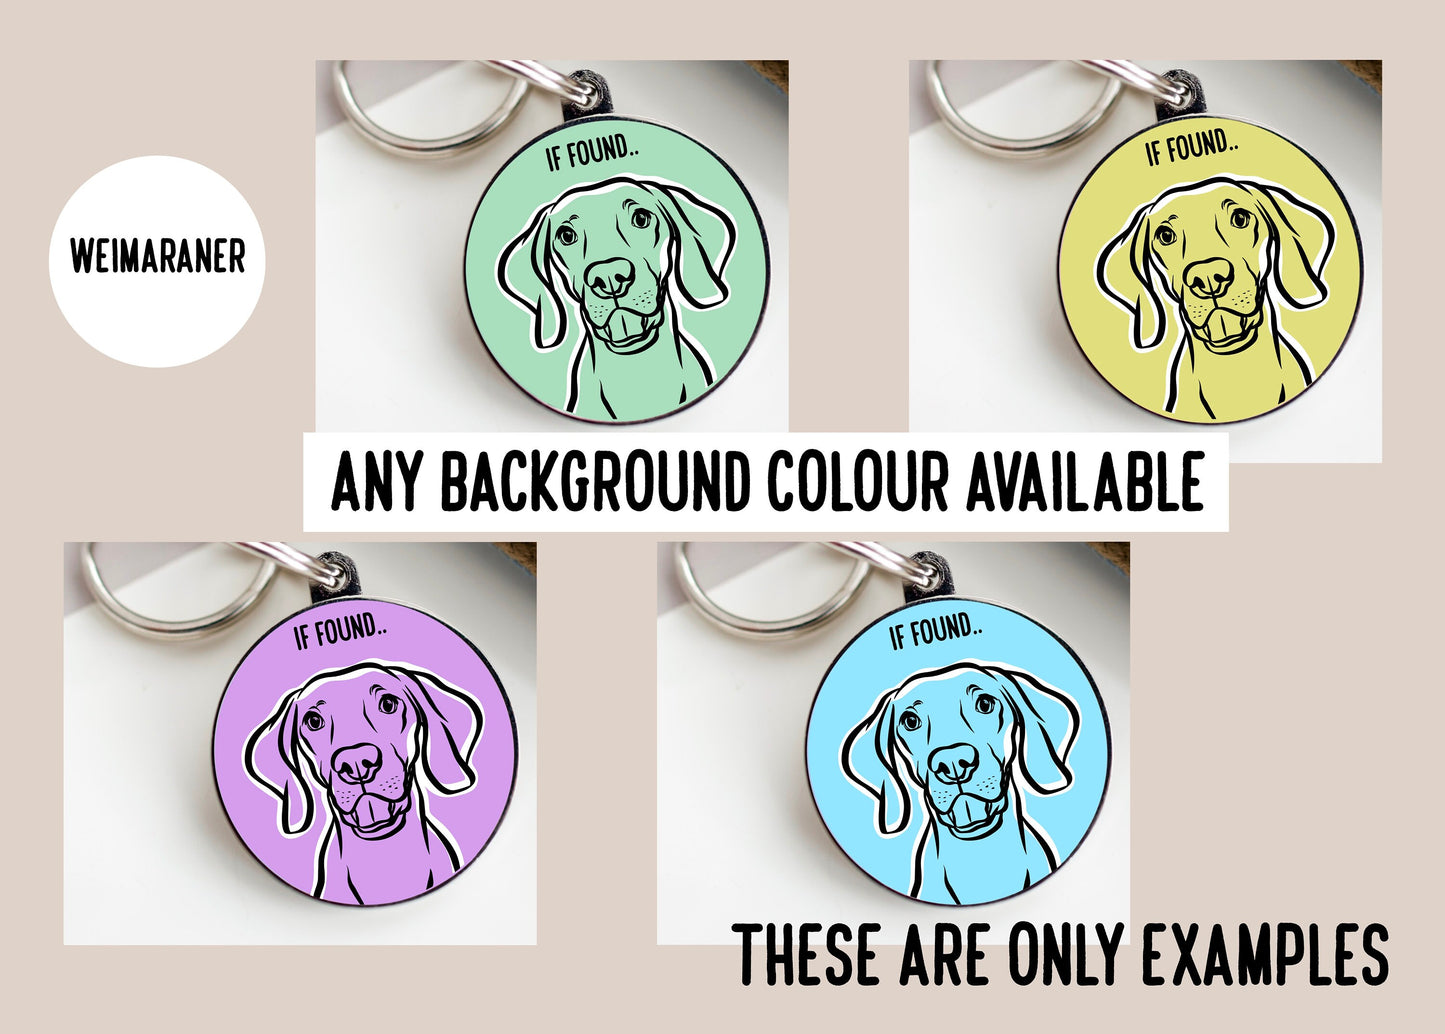 Weimaraner Outline ID Tag/ Dog Breed Collar Tag/ Custom Pet Name ID Tag/ Personalised Weimaraner Lover Gift/ Bespoke Breed Dog Tag